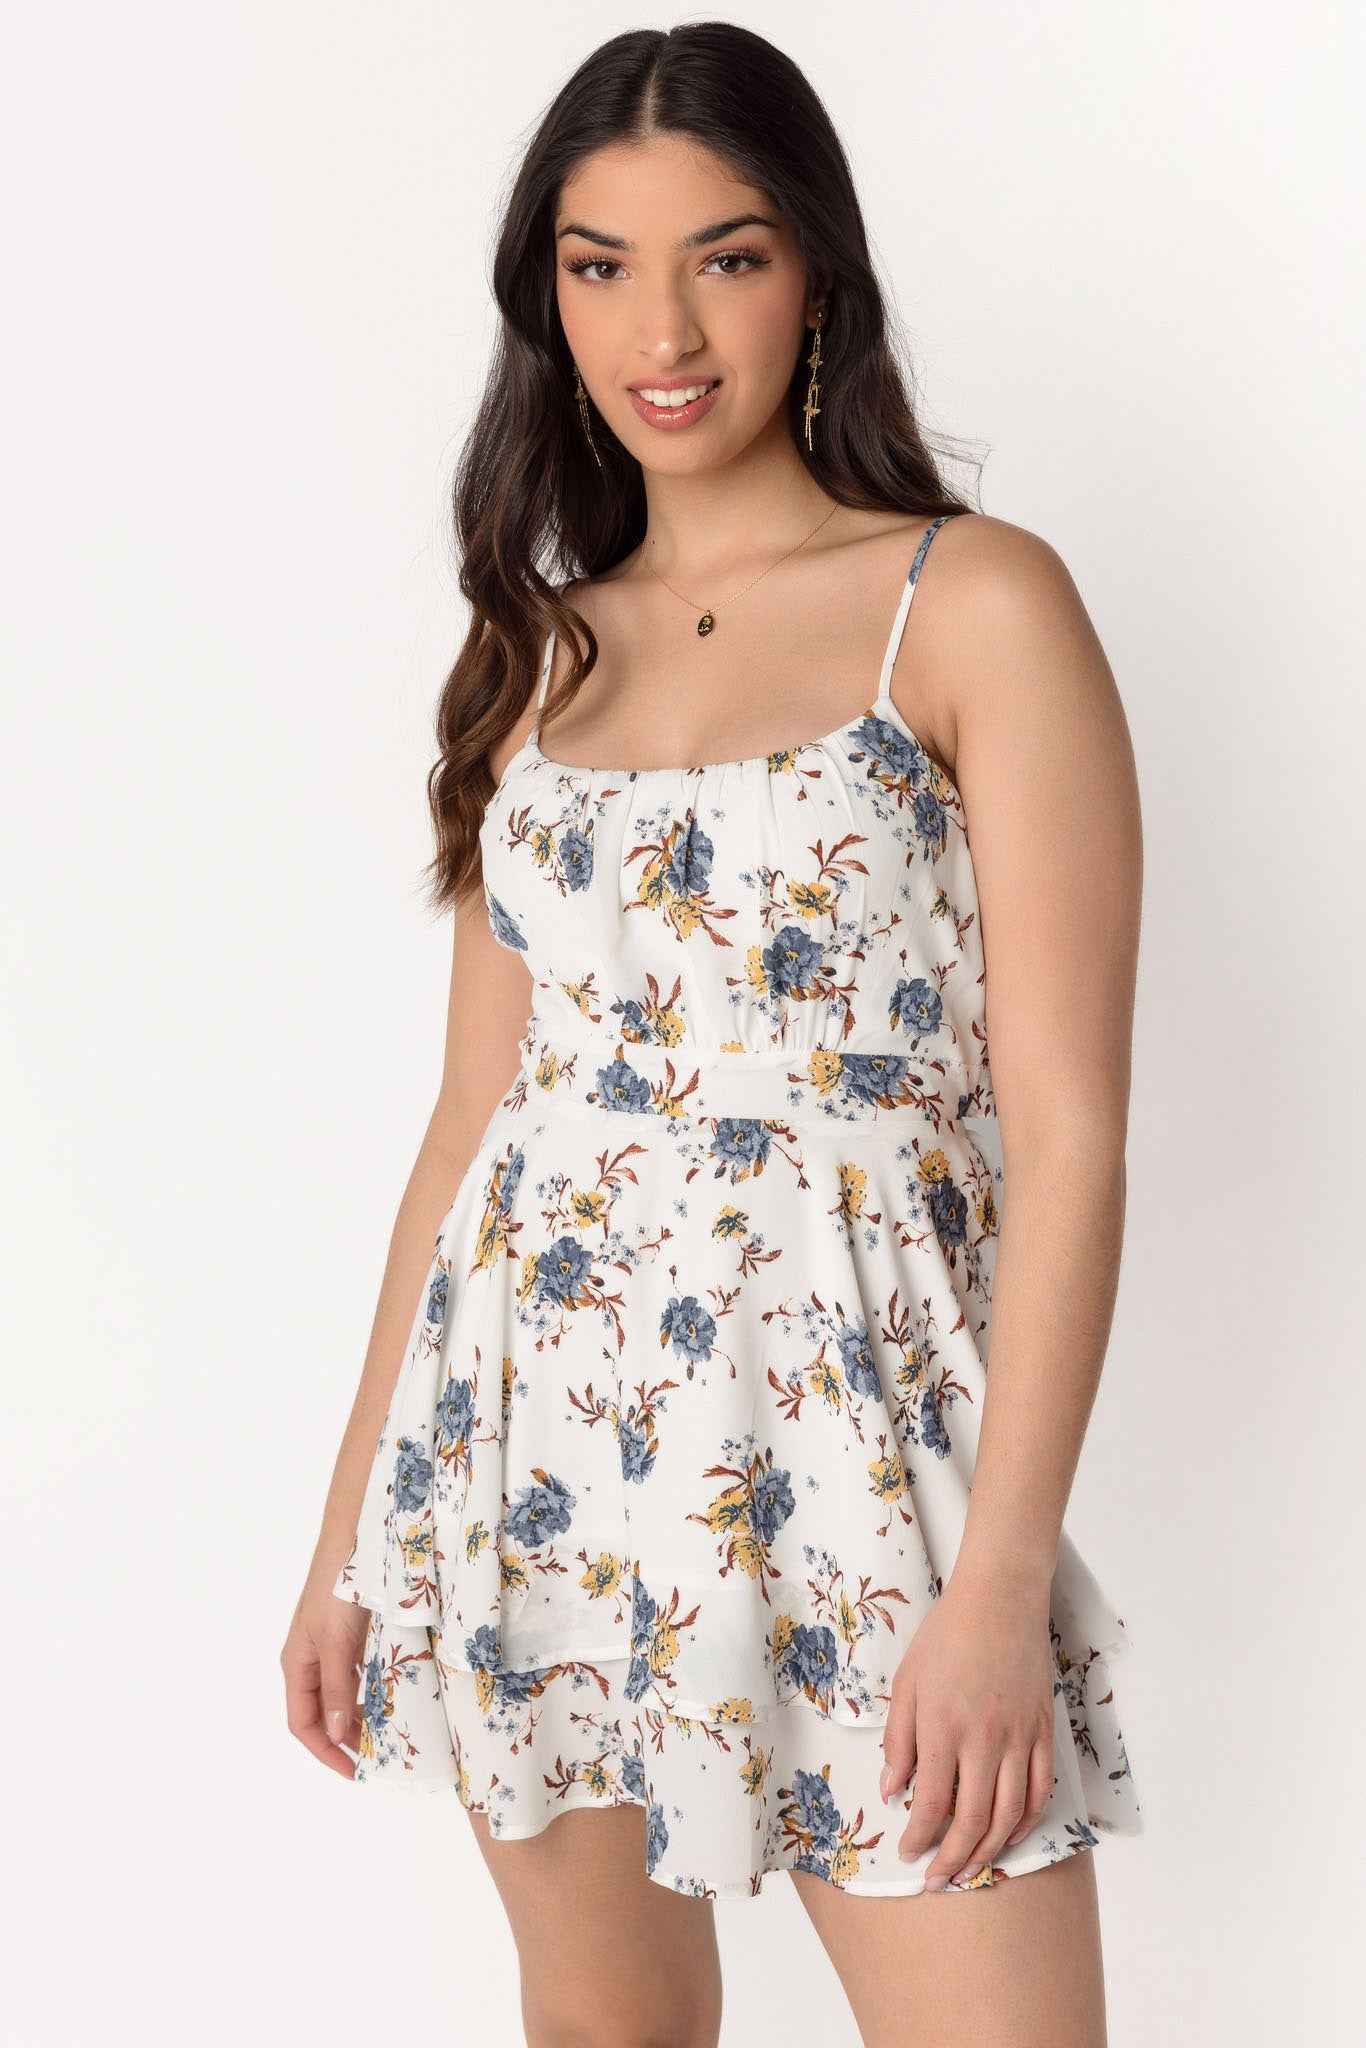 Floral Spaghetti Strap Emma Bust with Tie-Back